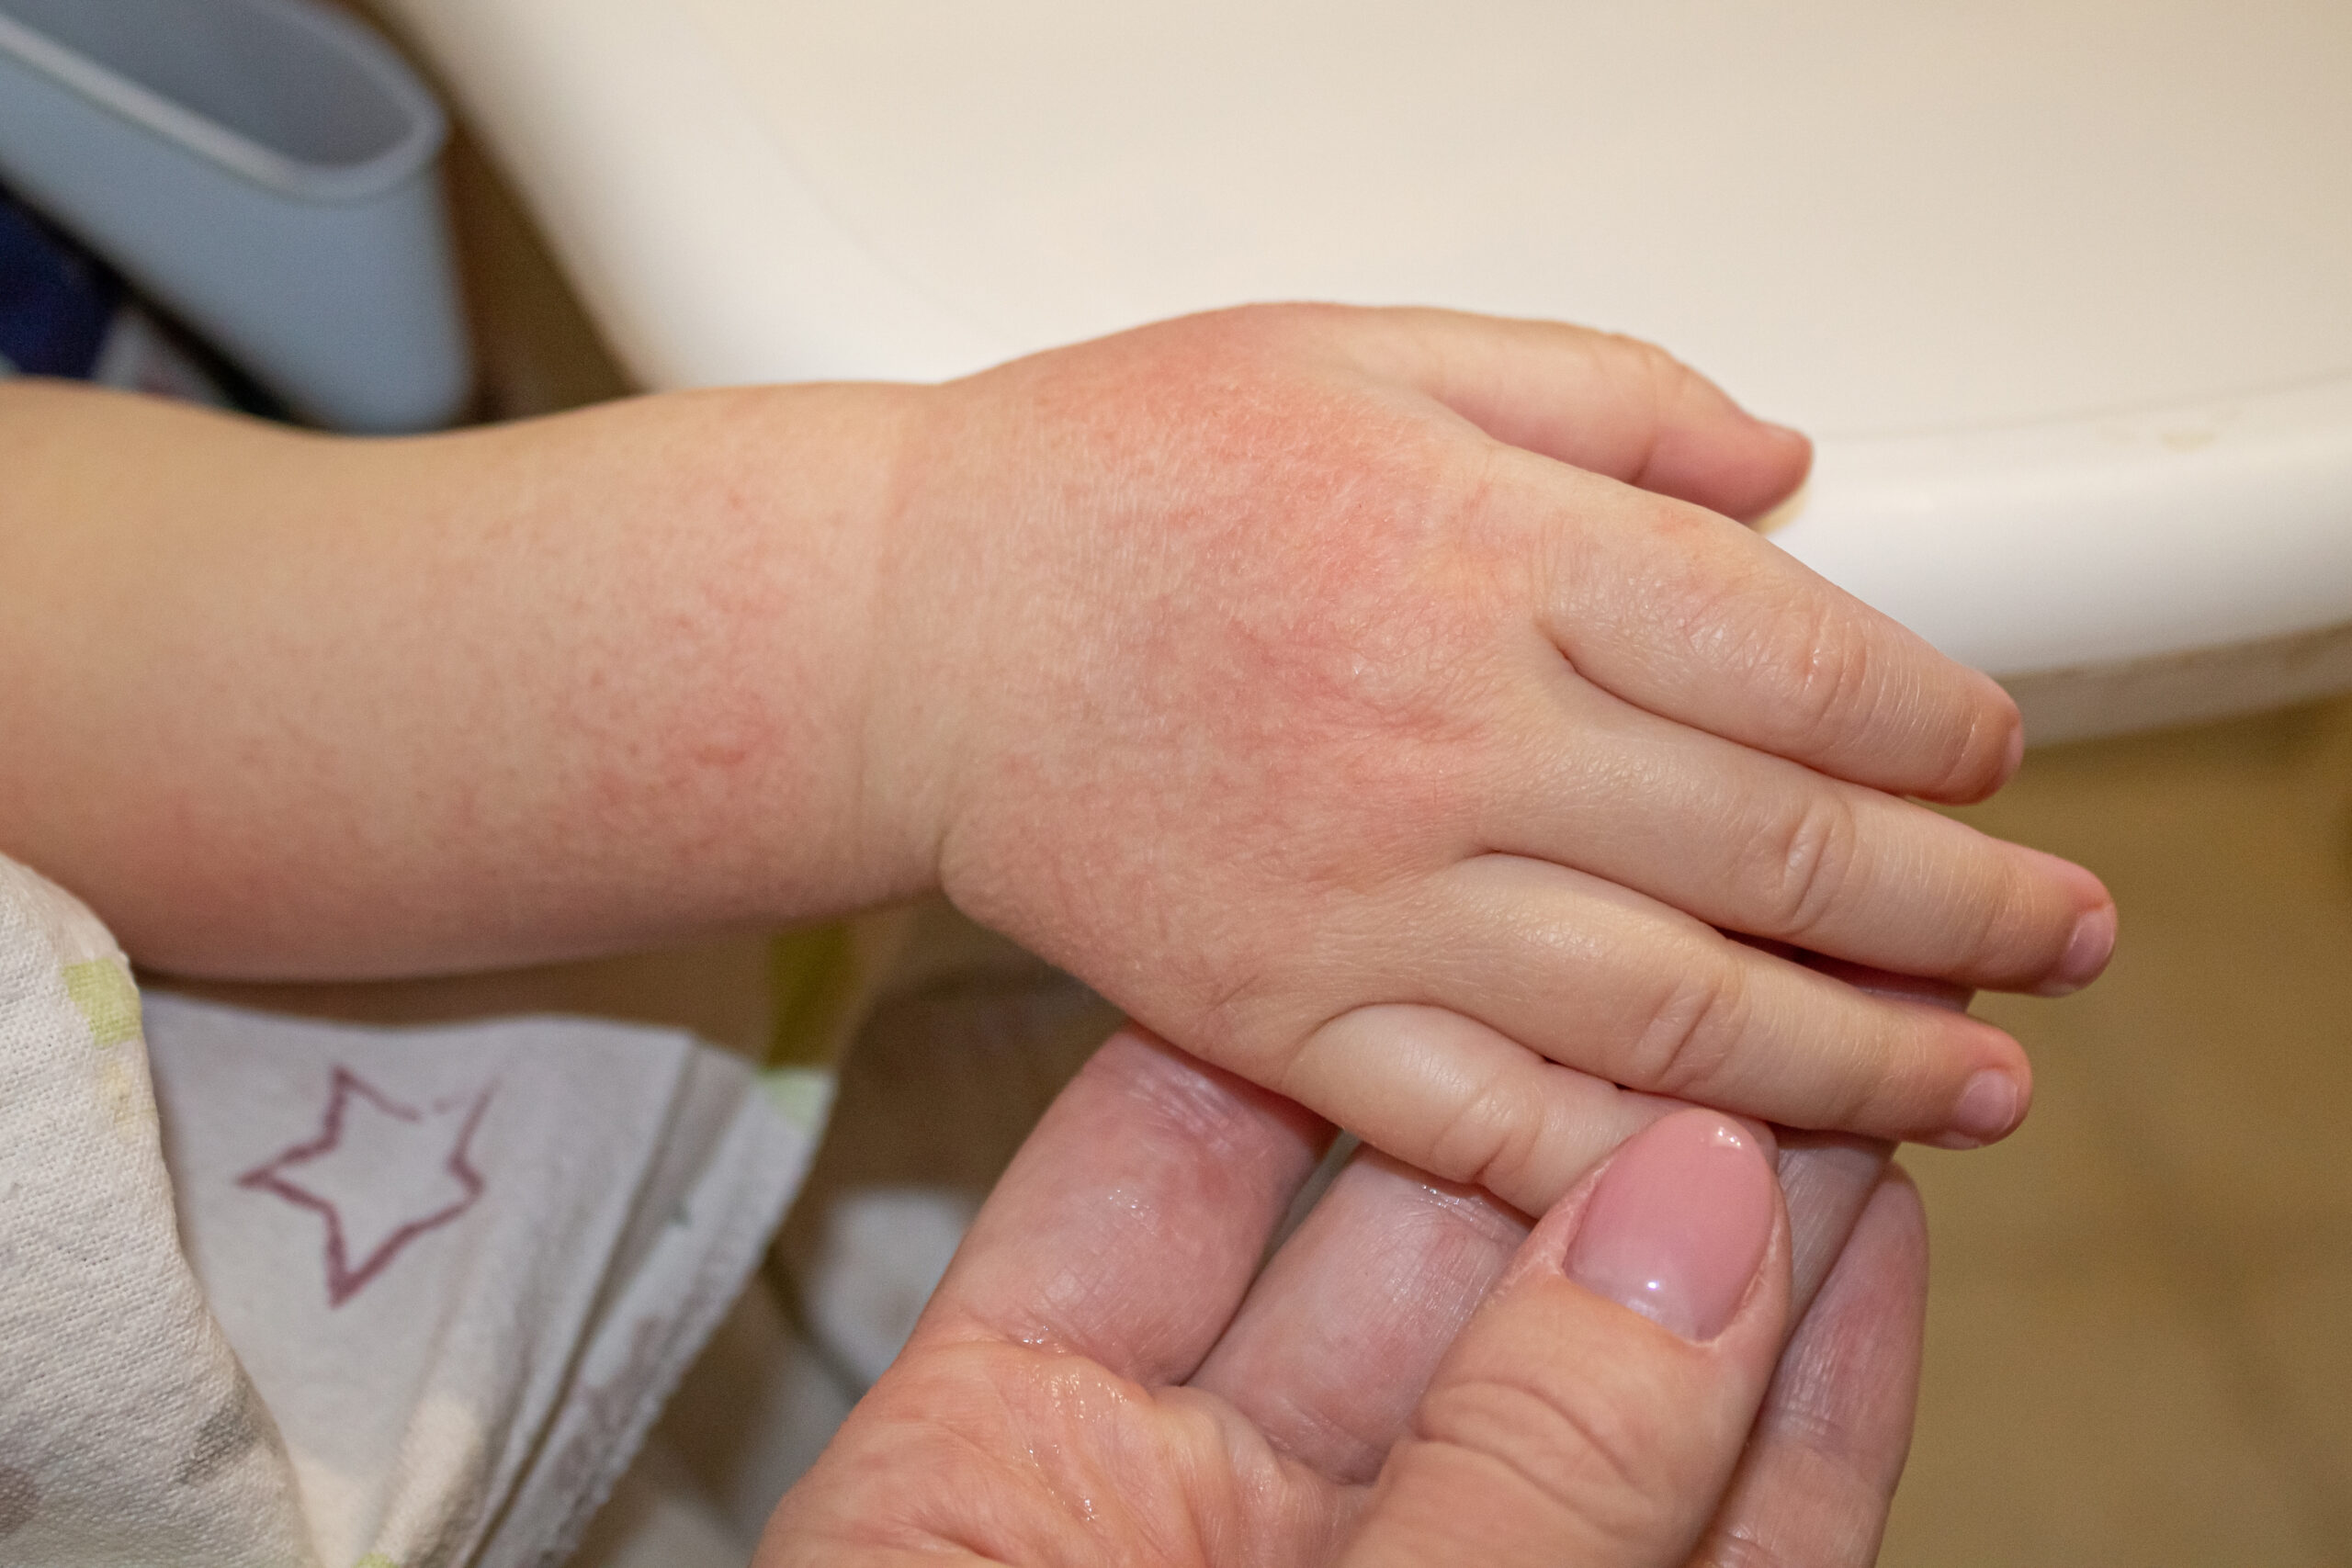 treat eczema and dermatitis with homeopathy medicine